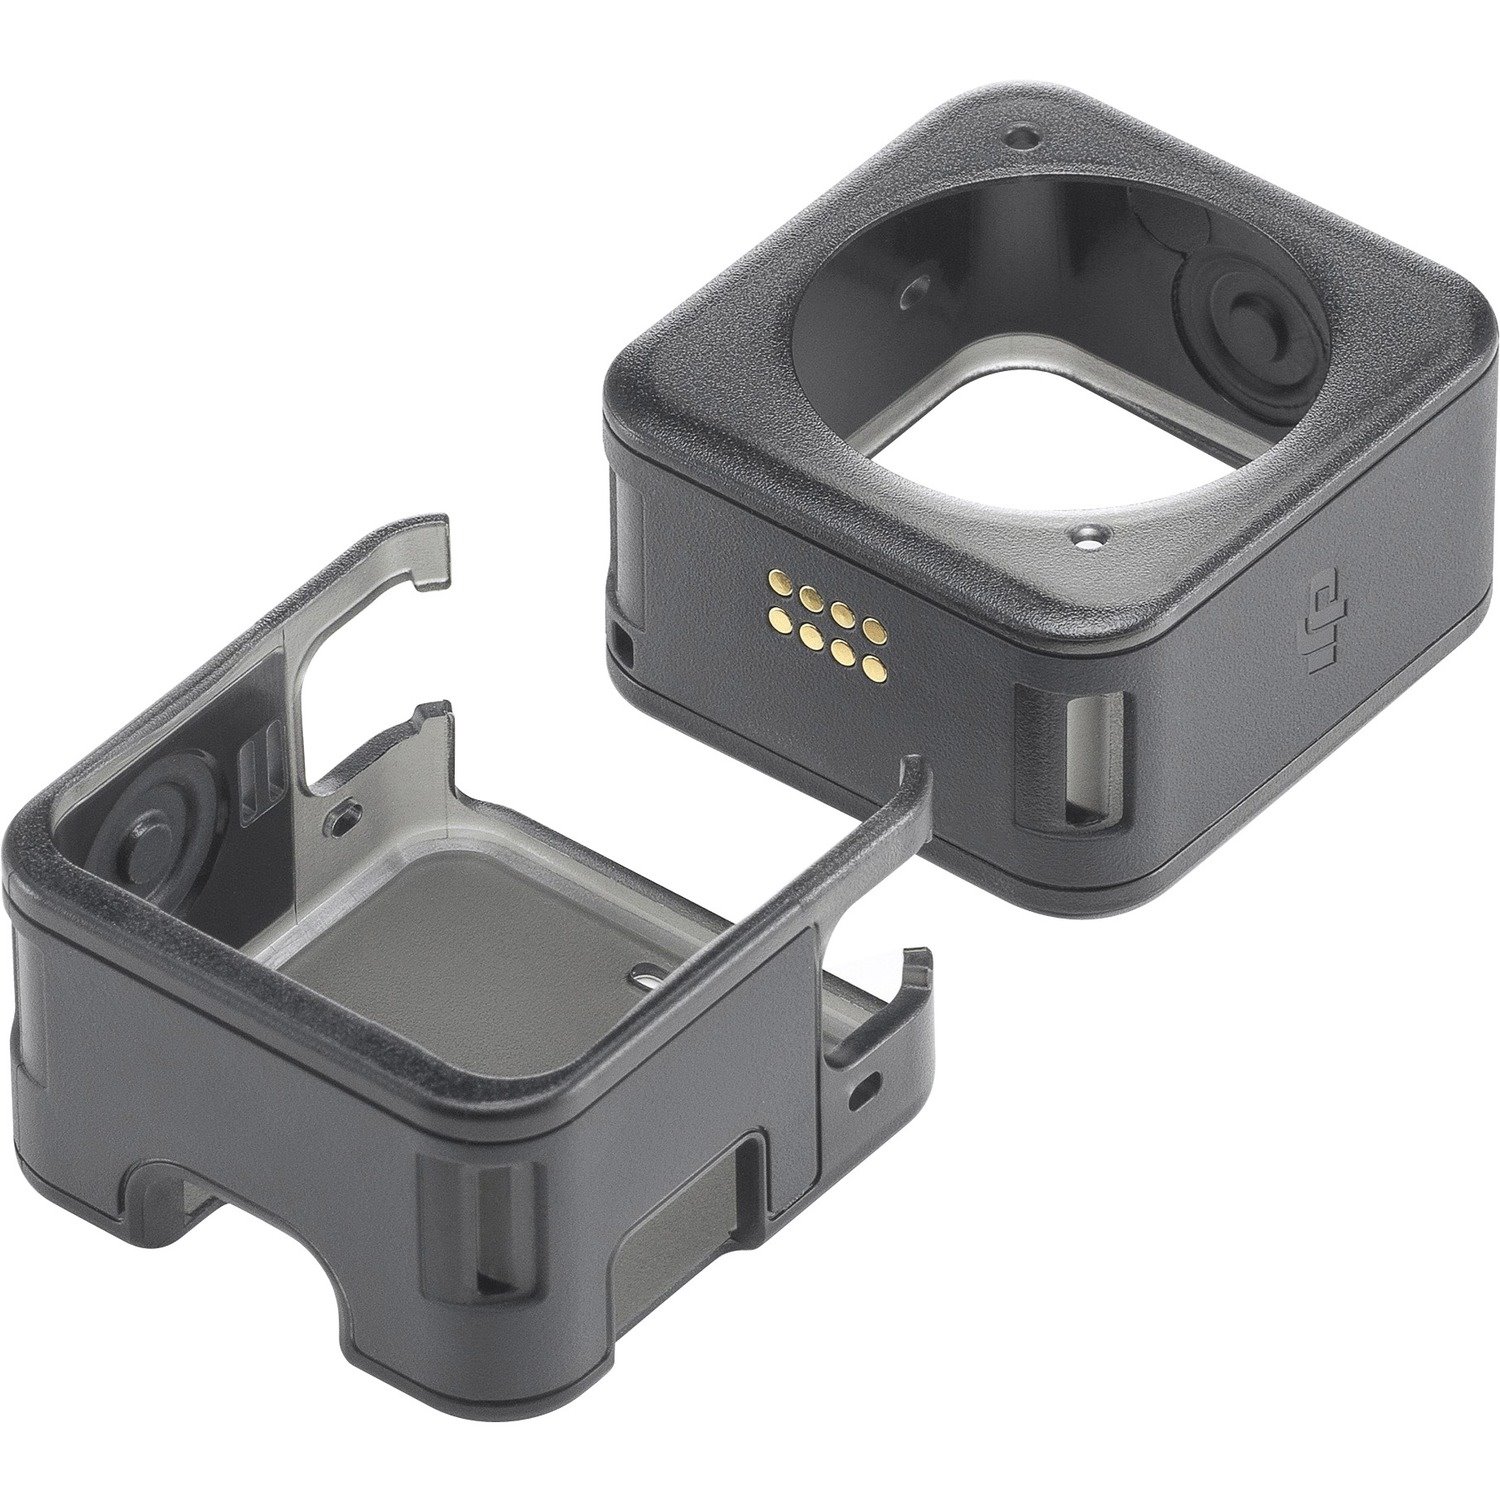 Dji Action 2 Magnetic Protective Case